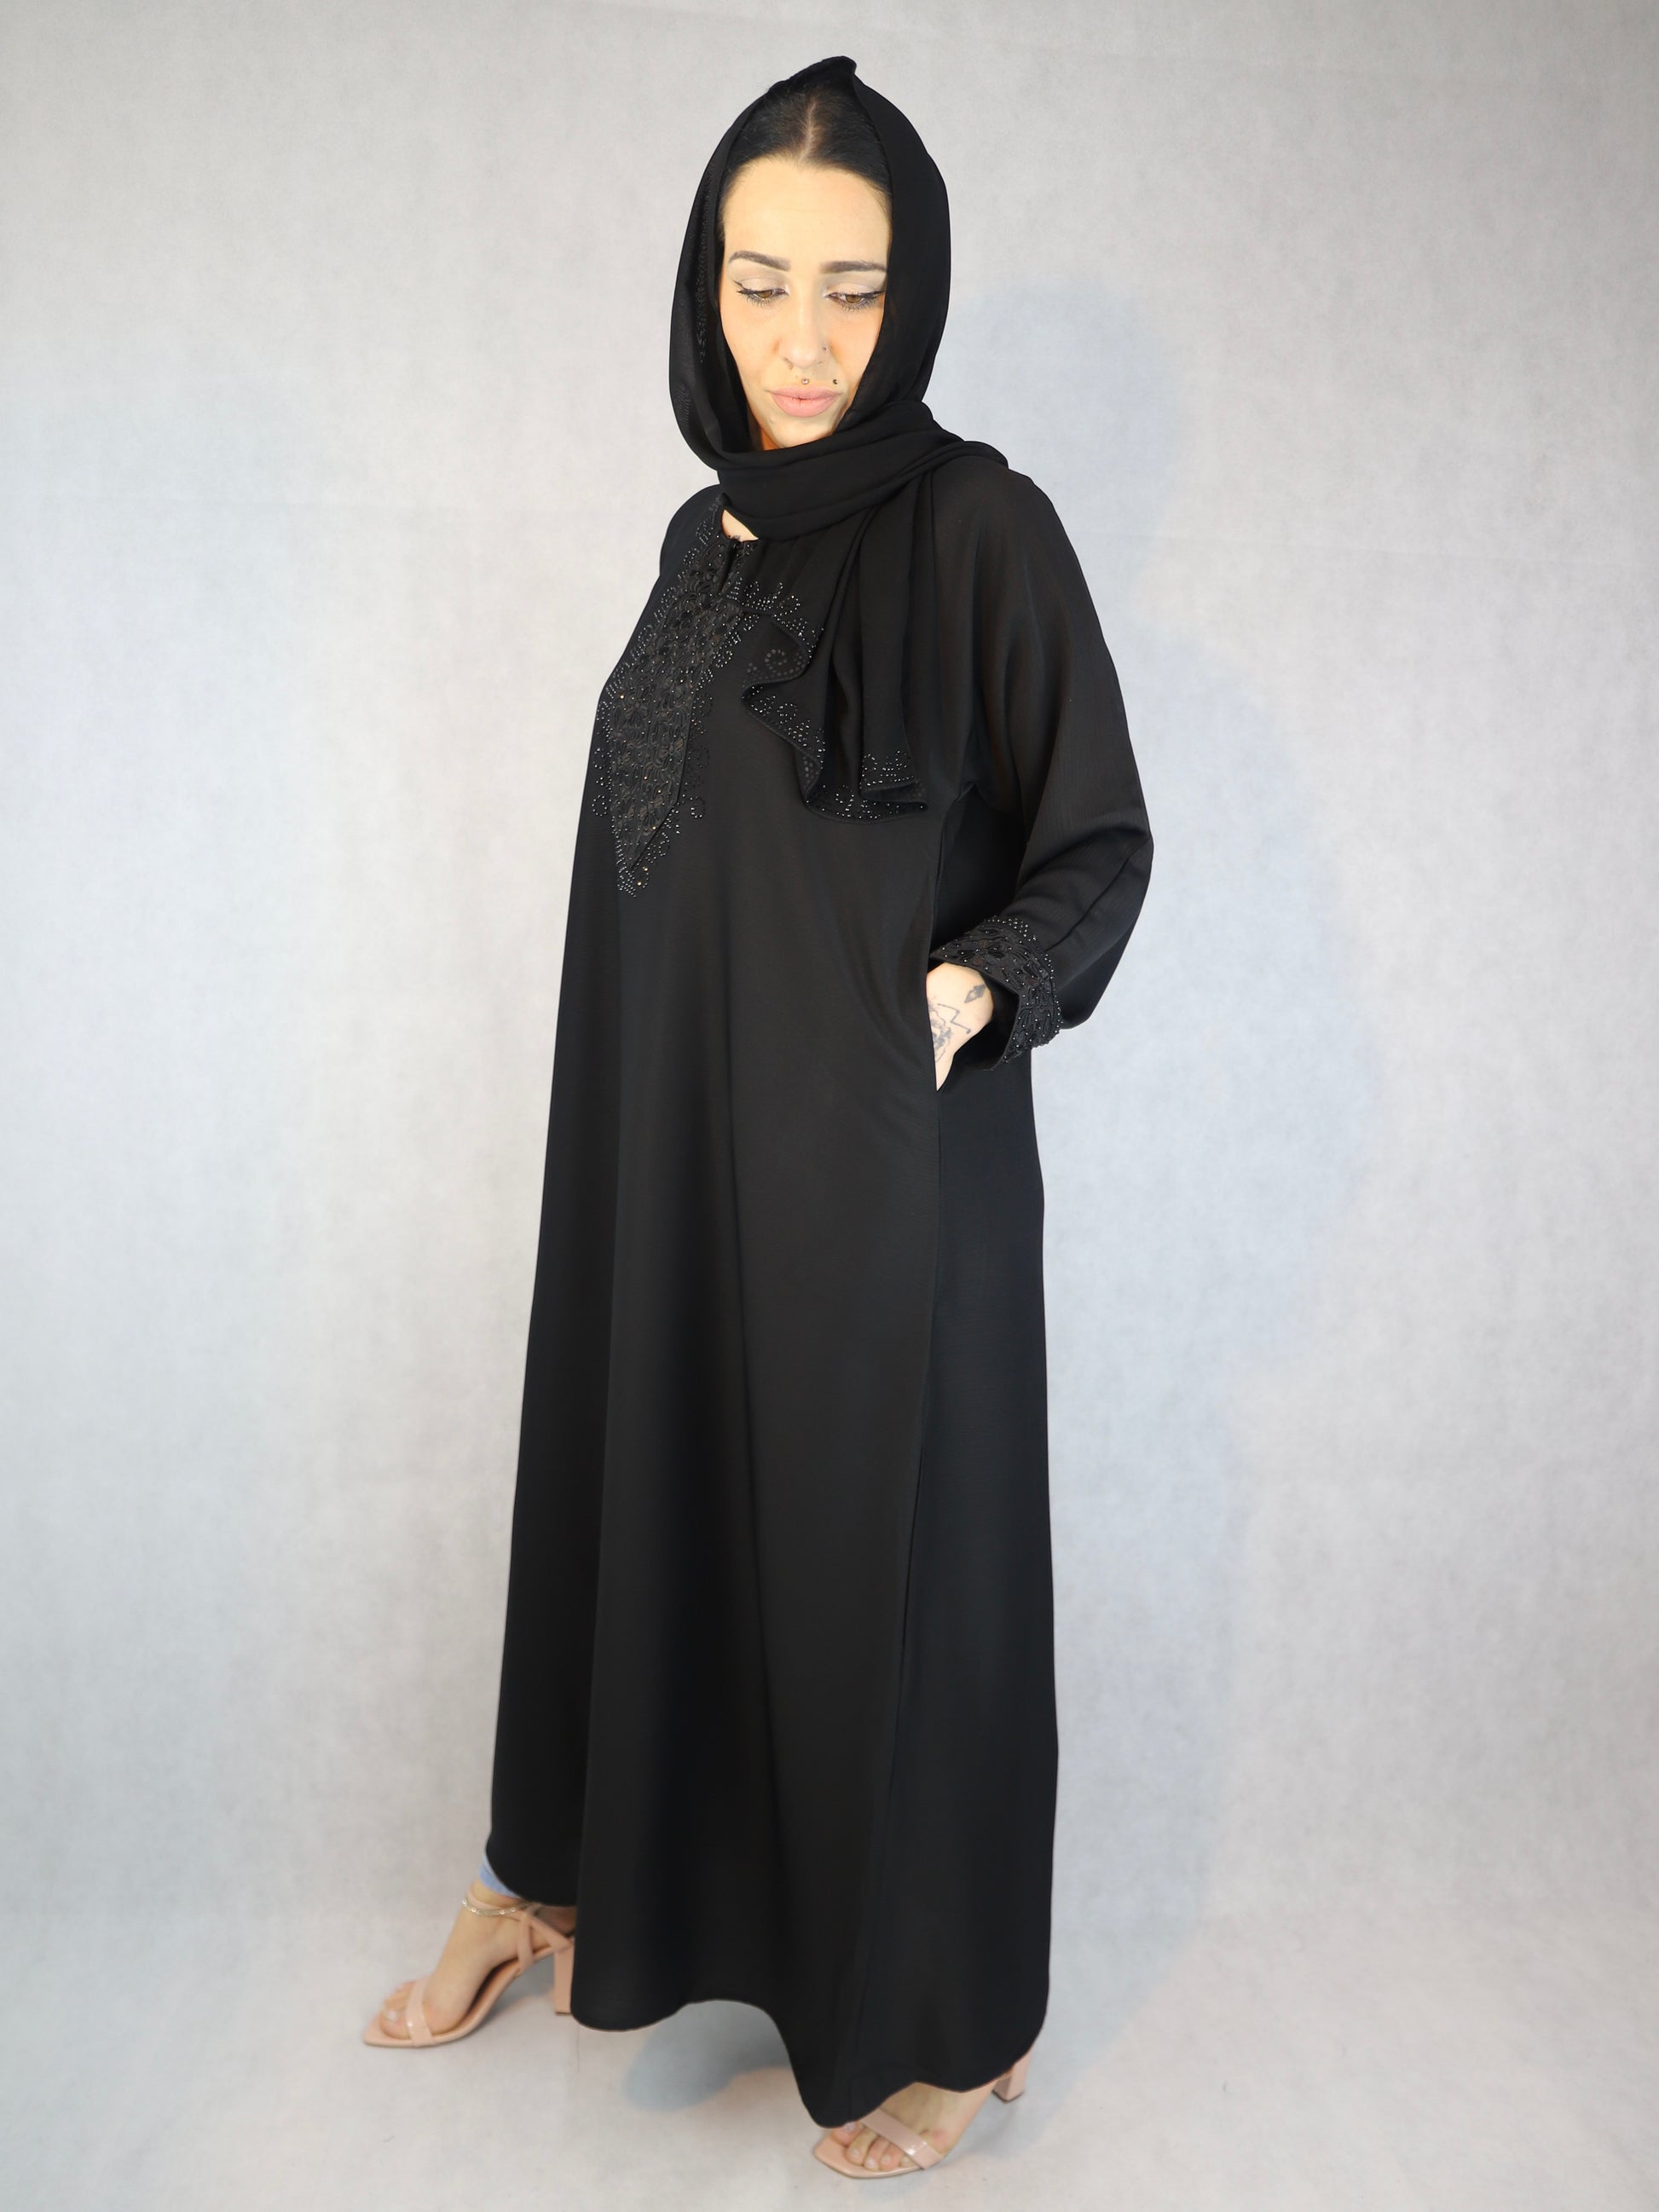 half lace black  abaya For Women with stone work,abaya abayas modest abaya dress modest dresses black abaya modest dress abaya united kingdom white abaya abaya for women modest dresses for women modest maxi dresses women abaya abaya dress dresses